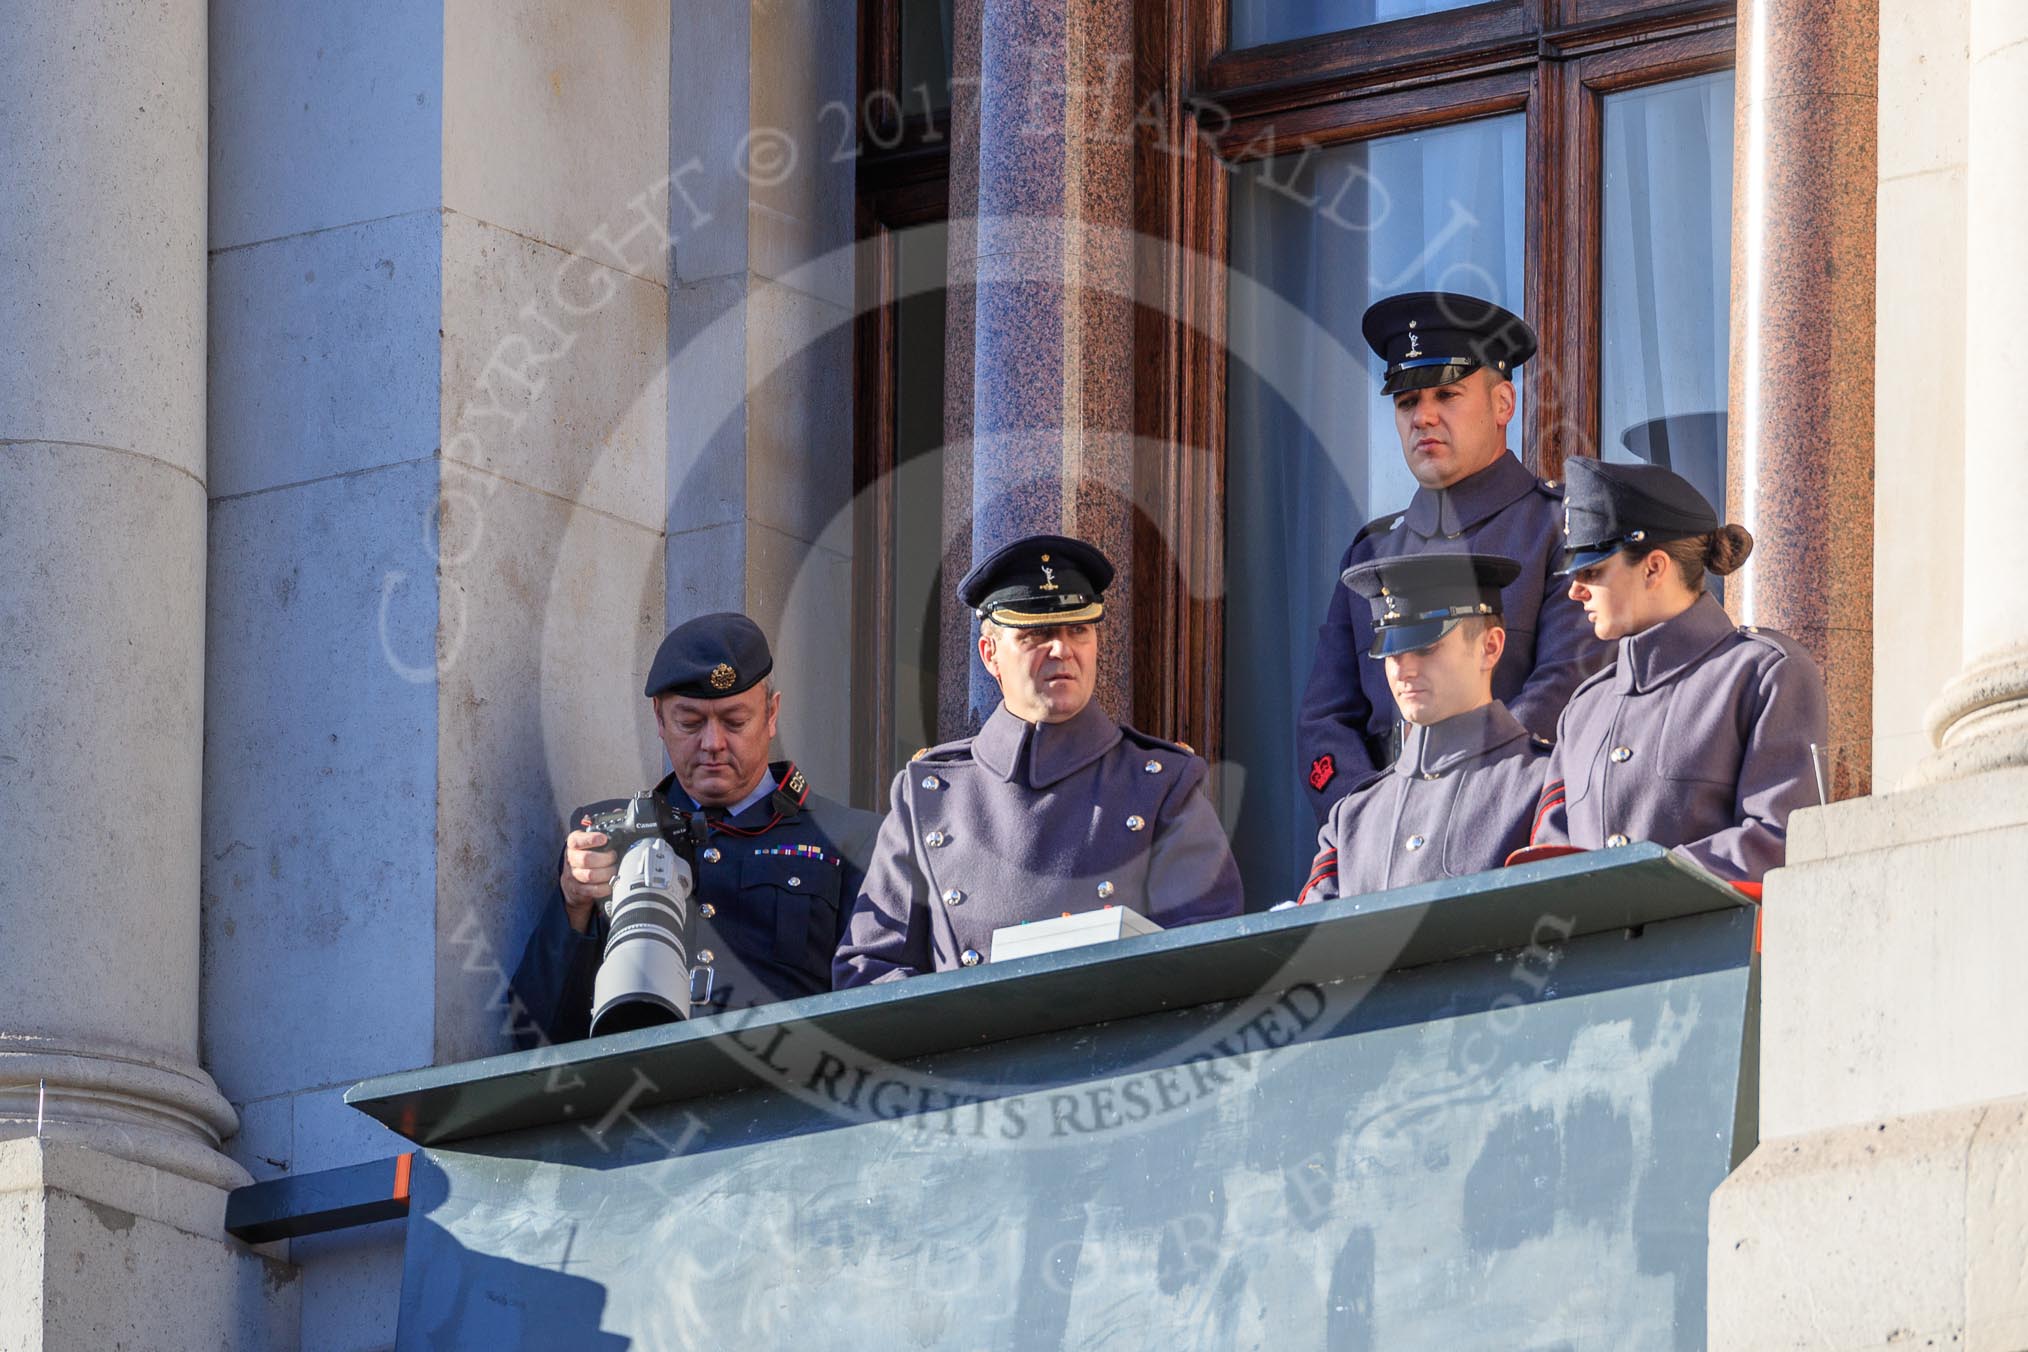 Army officers and an army photographer in one of the top floor windows of the Foreign and Commonwealth Office before the Remembrance Sunday Cenotaph Ceremony 2018 at Horse Guards Parade, Westminster, London, 11 November 2018, 09:52. I believe they control all or parts of the event - if you know more, please let me know!